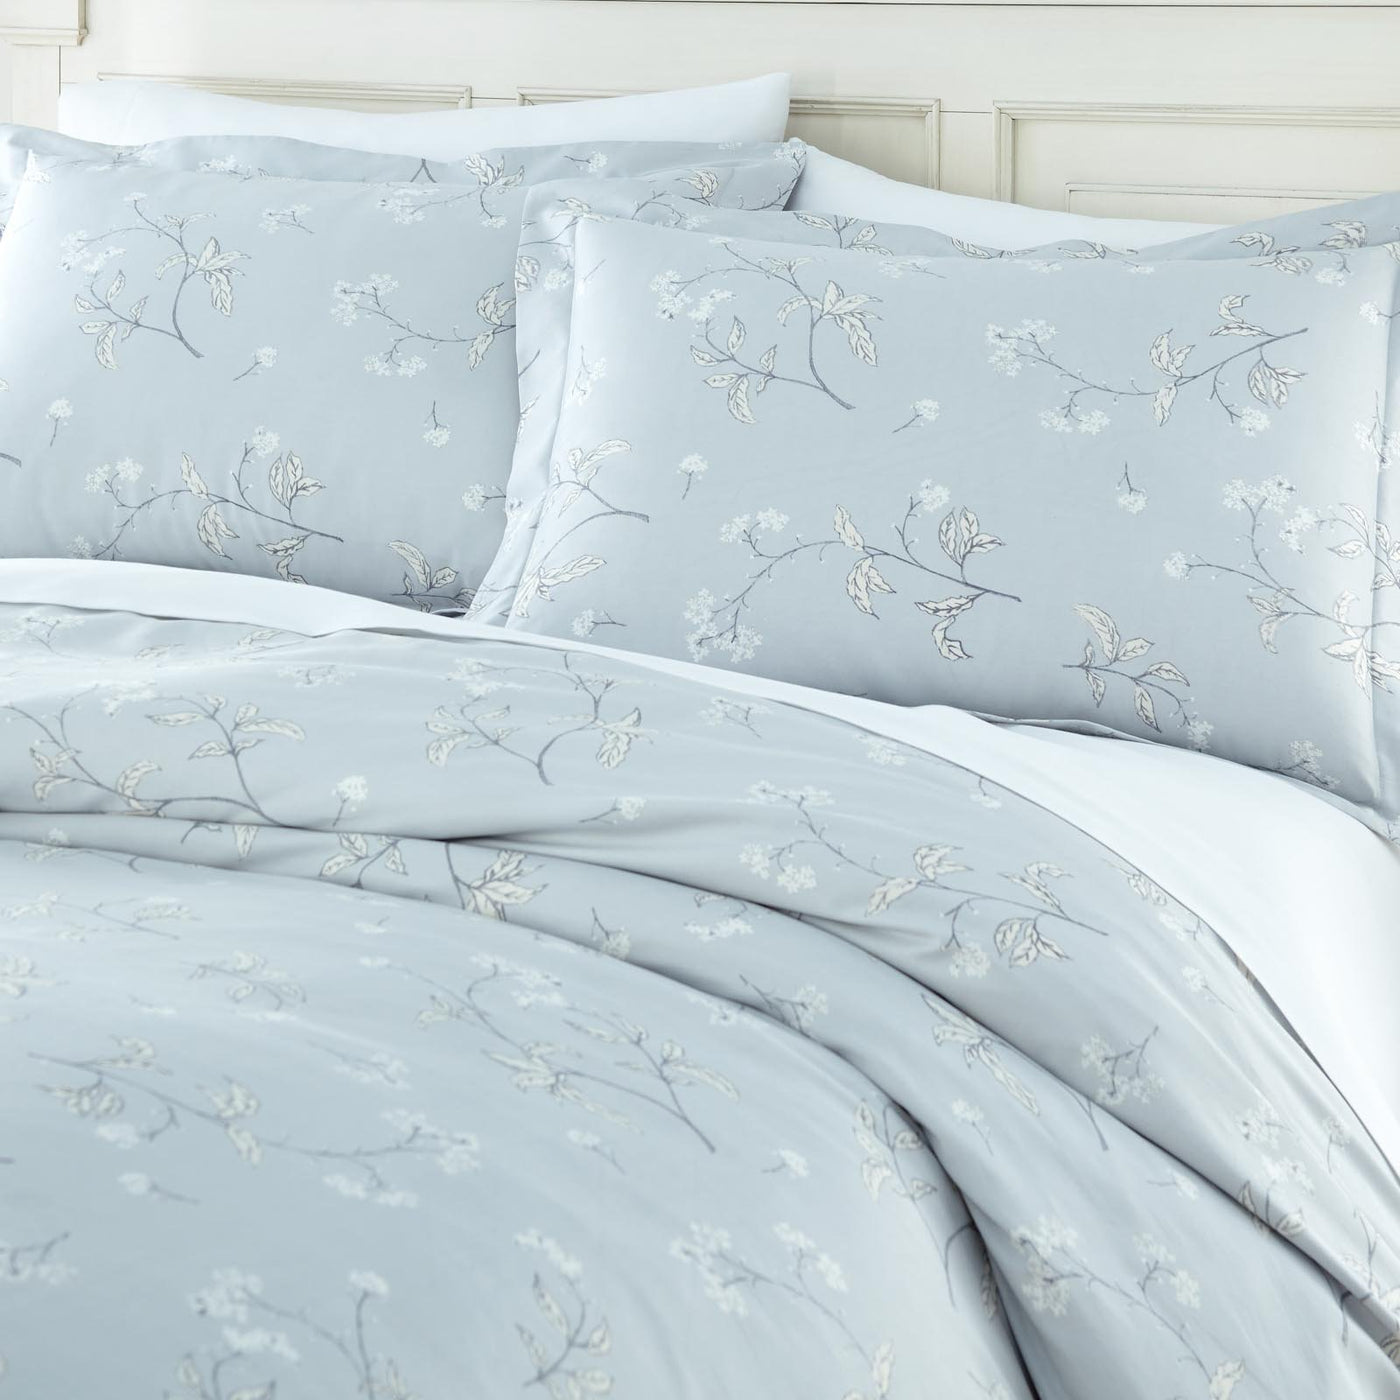 Forget Me Not Cotton Duvet Cover in Grey